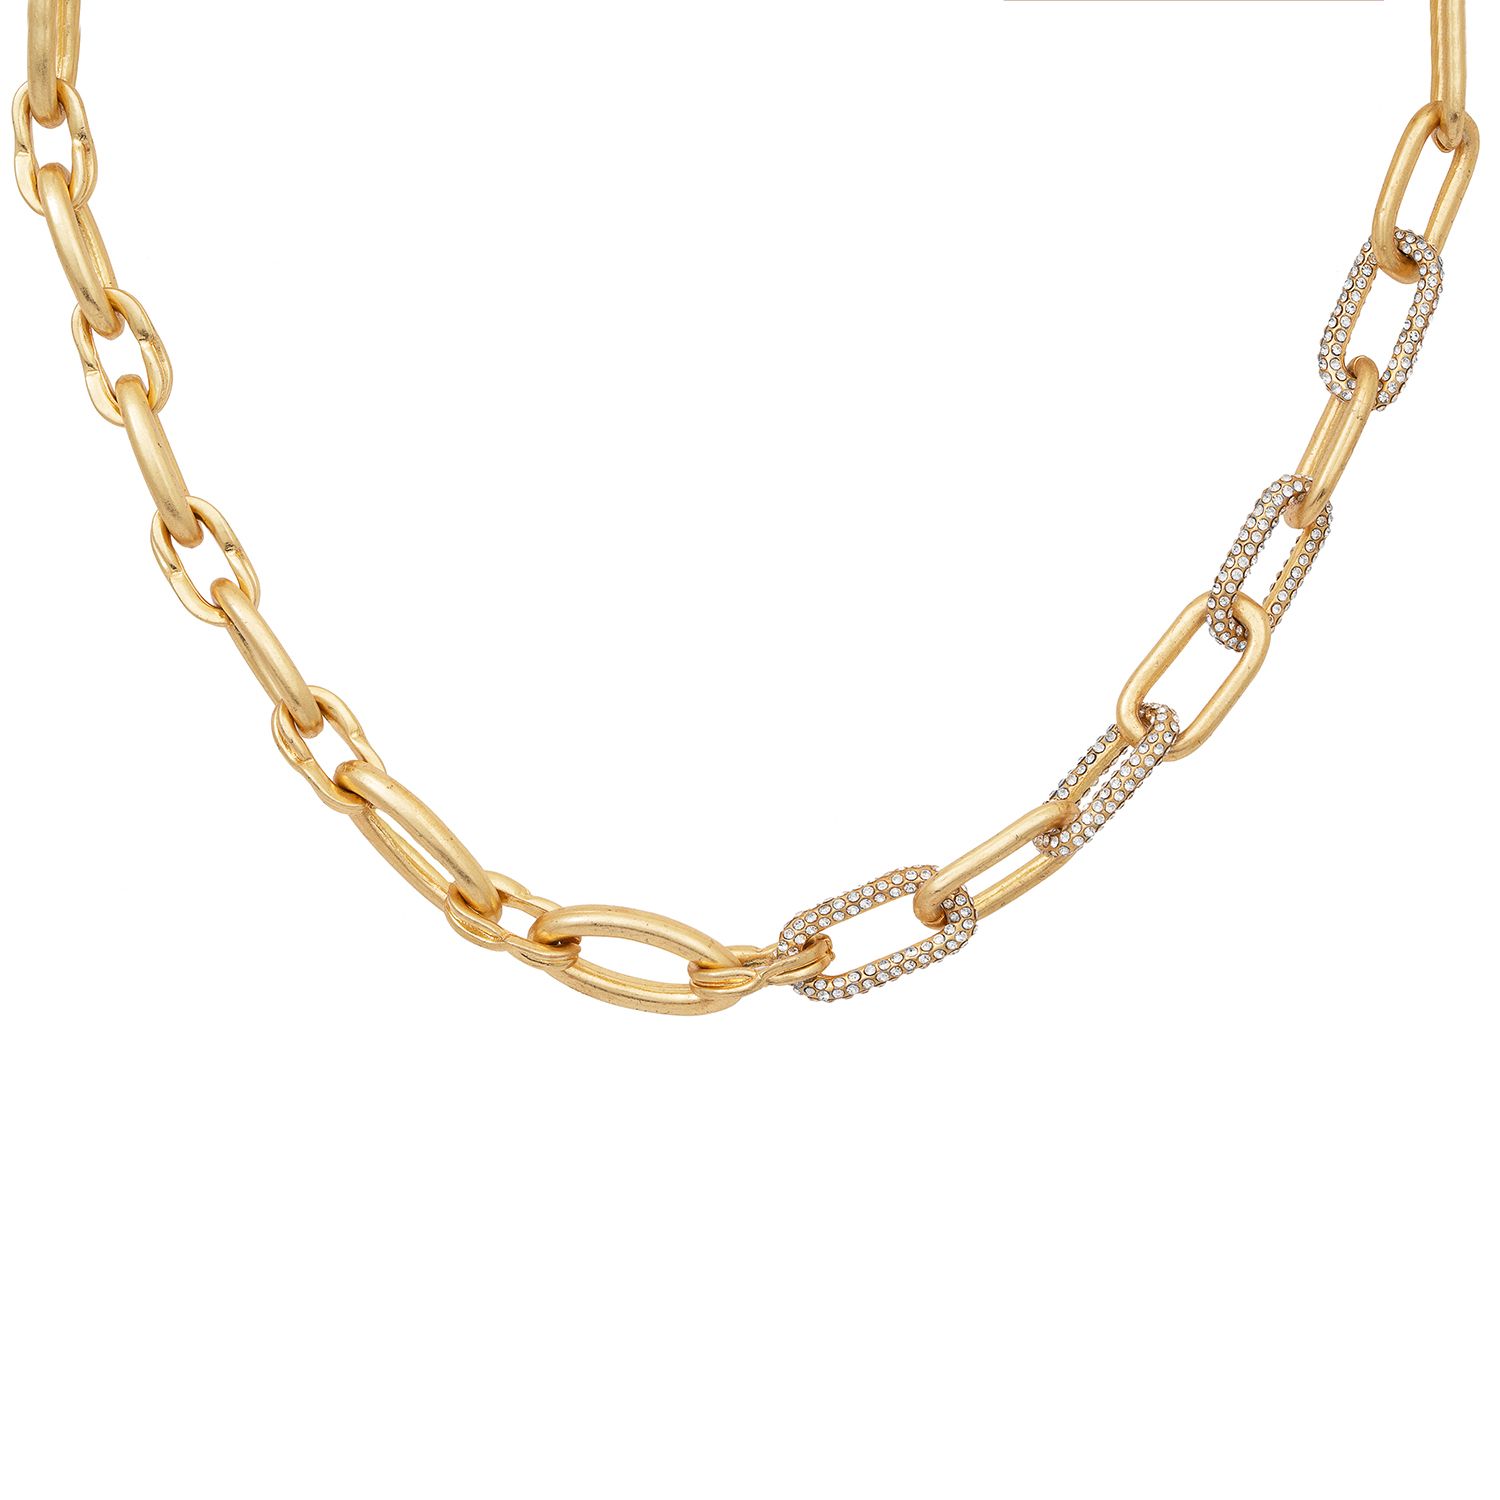 Simple and stunning, this gold chunky necklace features subtle sparkle with pave encrusted links on one half. Strong but delicate, it's such an on trend look right now and perfect for the winter months when we need our jewellery to really shine through. The 16 inch gold plated chain features a lobster clasp and 3 inch extender so you can adjust it for your look. It also comes with the most perfect matching bracelet! When it doubt, go simple and style it out.